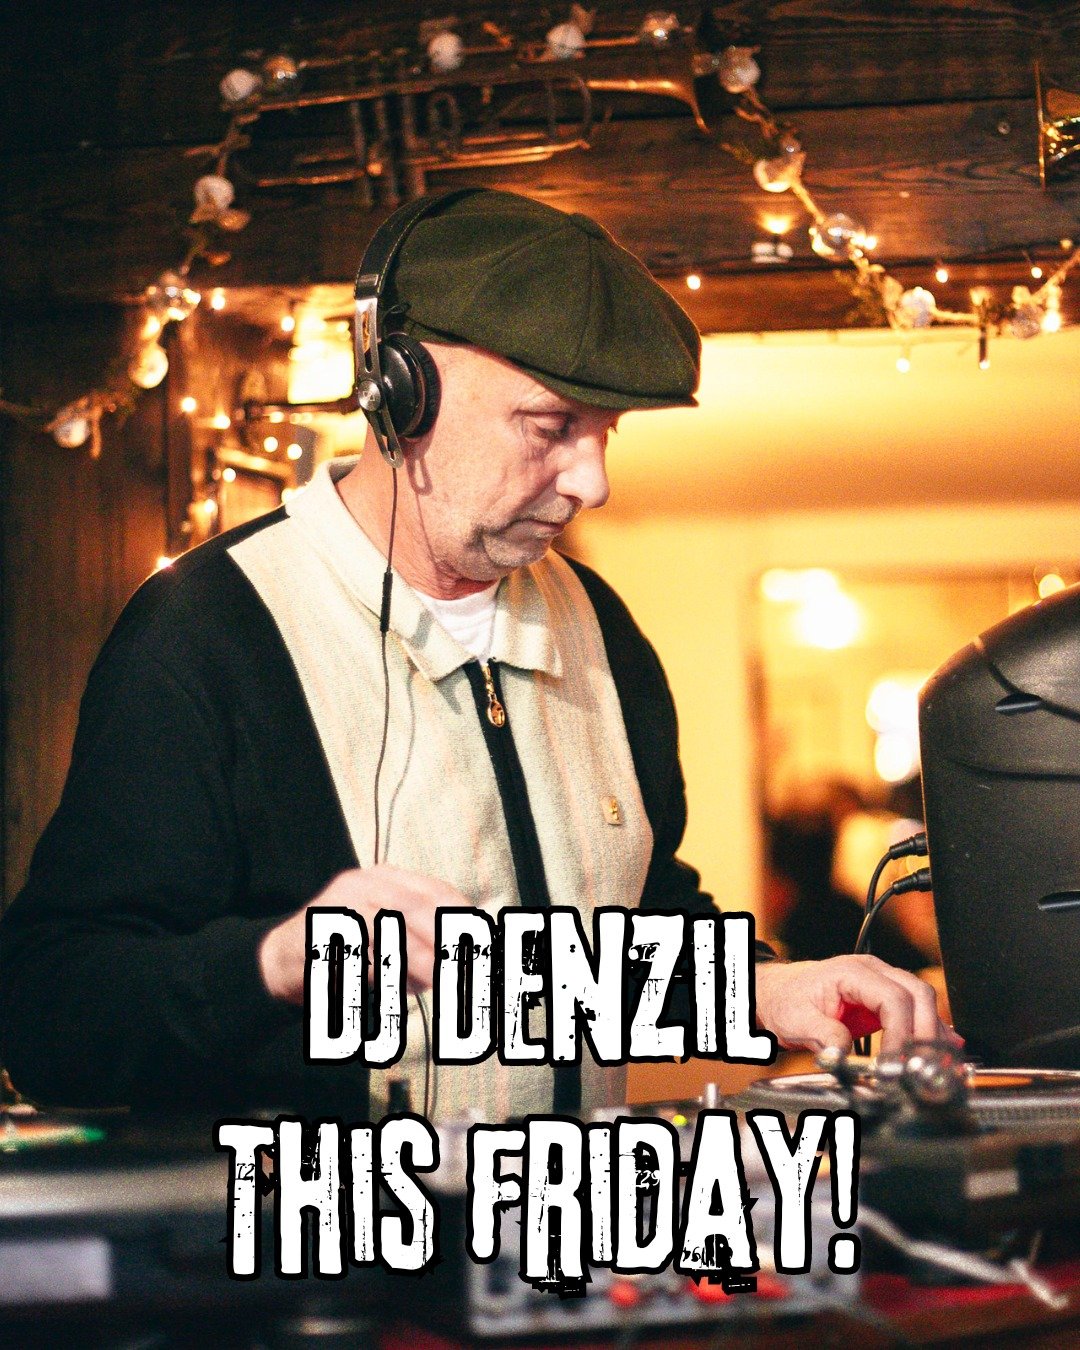 Get ready for an epic start to the bank holiday weekend at The Royal Oak! 🎉 DJ Denzil is back this Friday, and he's bringing the vibes from 7pm onwards. Who's excited? Join us for pints, friends, and hopefully some sunshine! 

#RoyalOak #BankHoliday